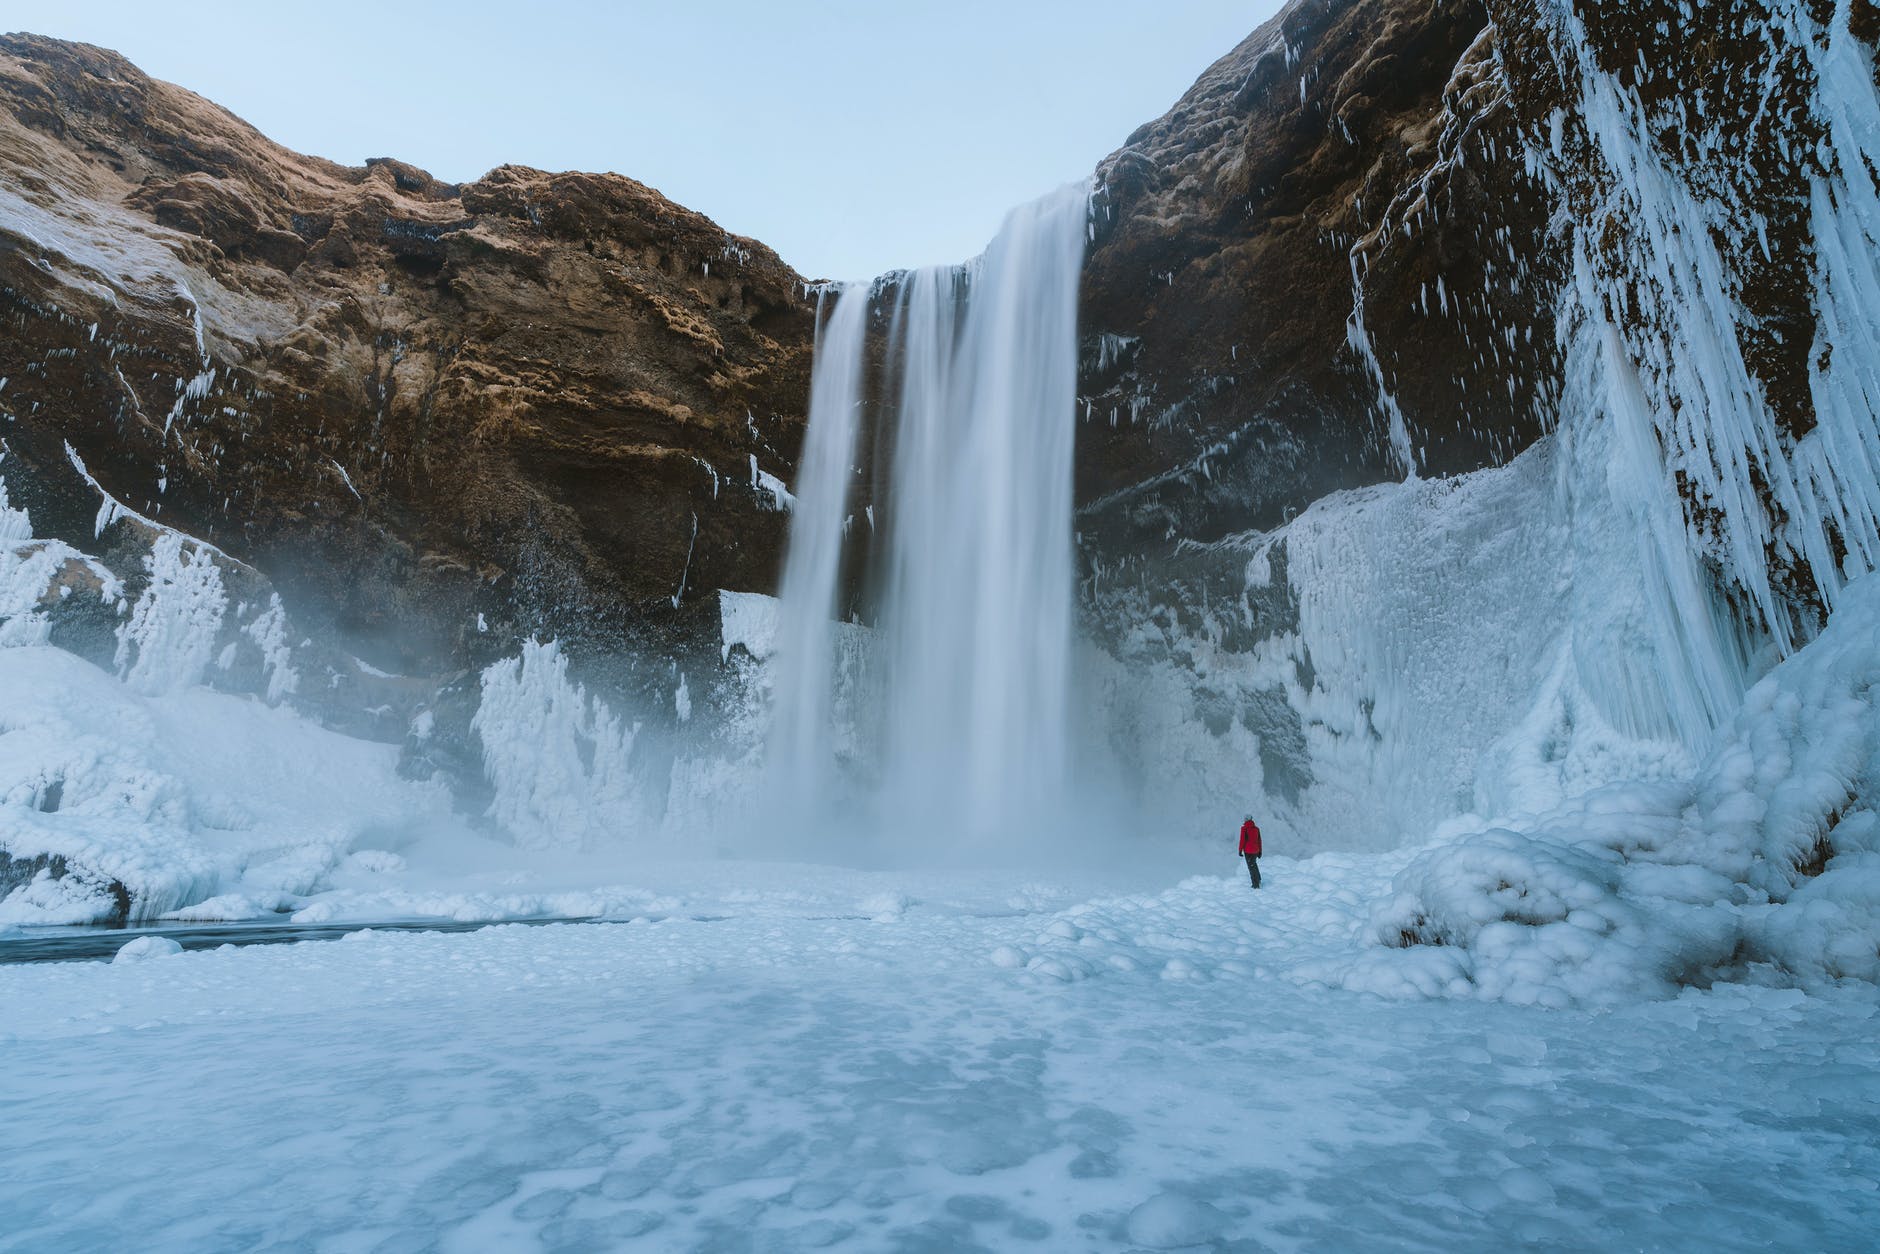 A person in a red coat in the distance in front of a tall waterfall amidst a snowy, white landscape. | Plan a trip to Iceland with these tips from Wanderful